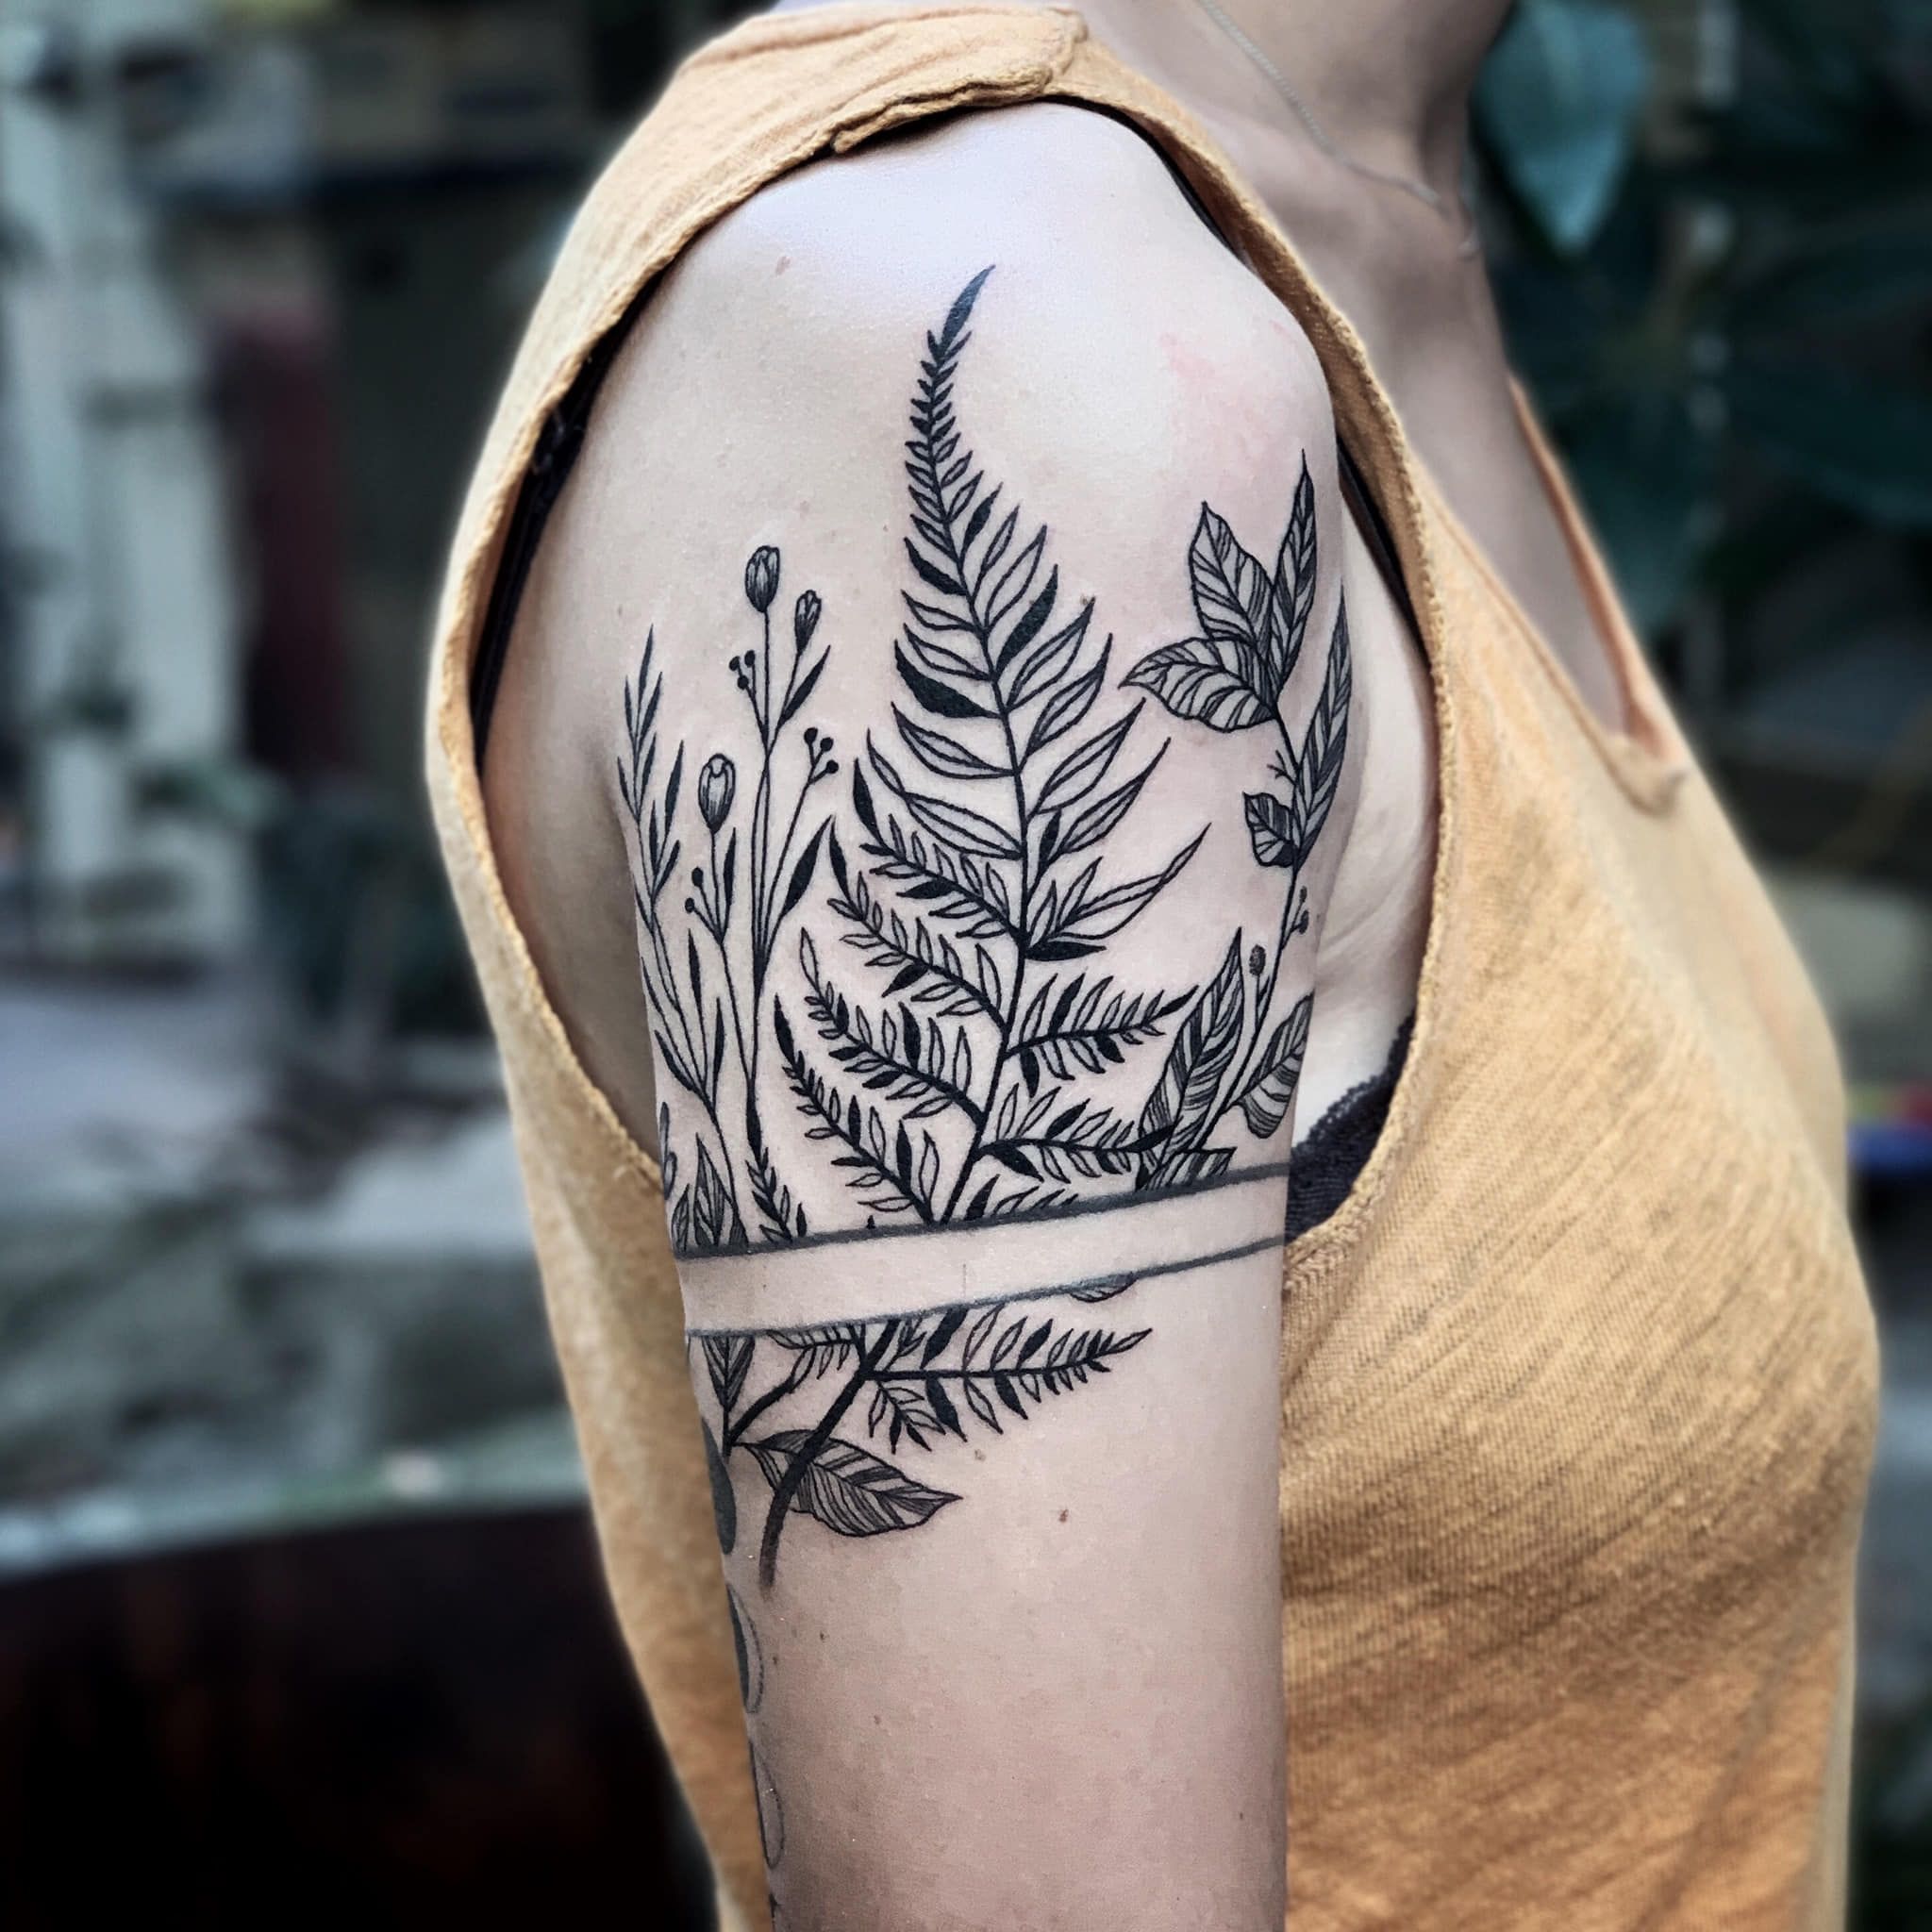 Top 5 Popular Tattoo Styles For Girls In 2019